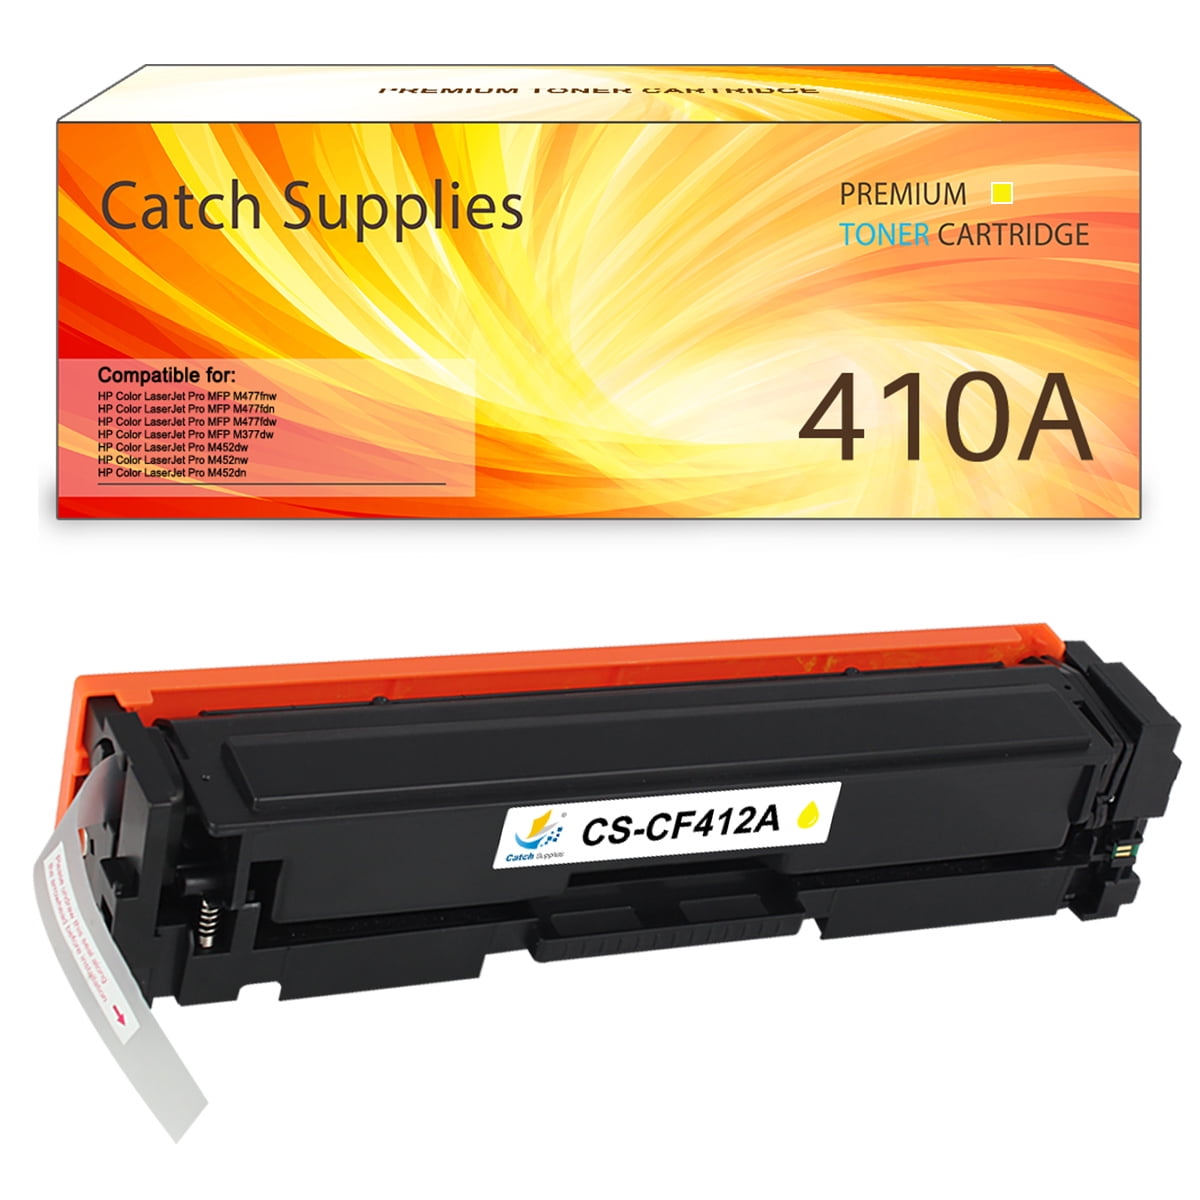 Catch Supplies Compatible for HP CF412A M452dw M452nw M452dn,MFP M477fnw M477fdw M377dw Printer Ink(1*Yellow, 1-Pack) - Walmart.com